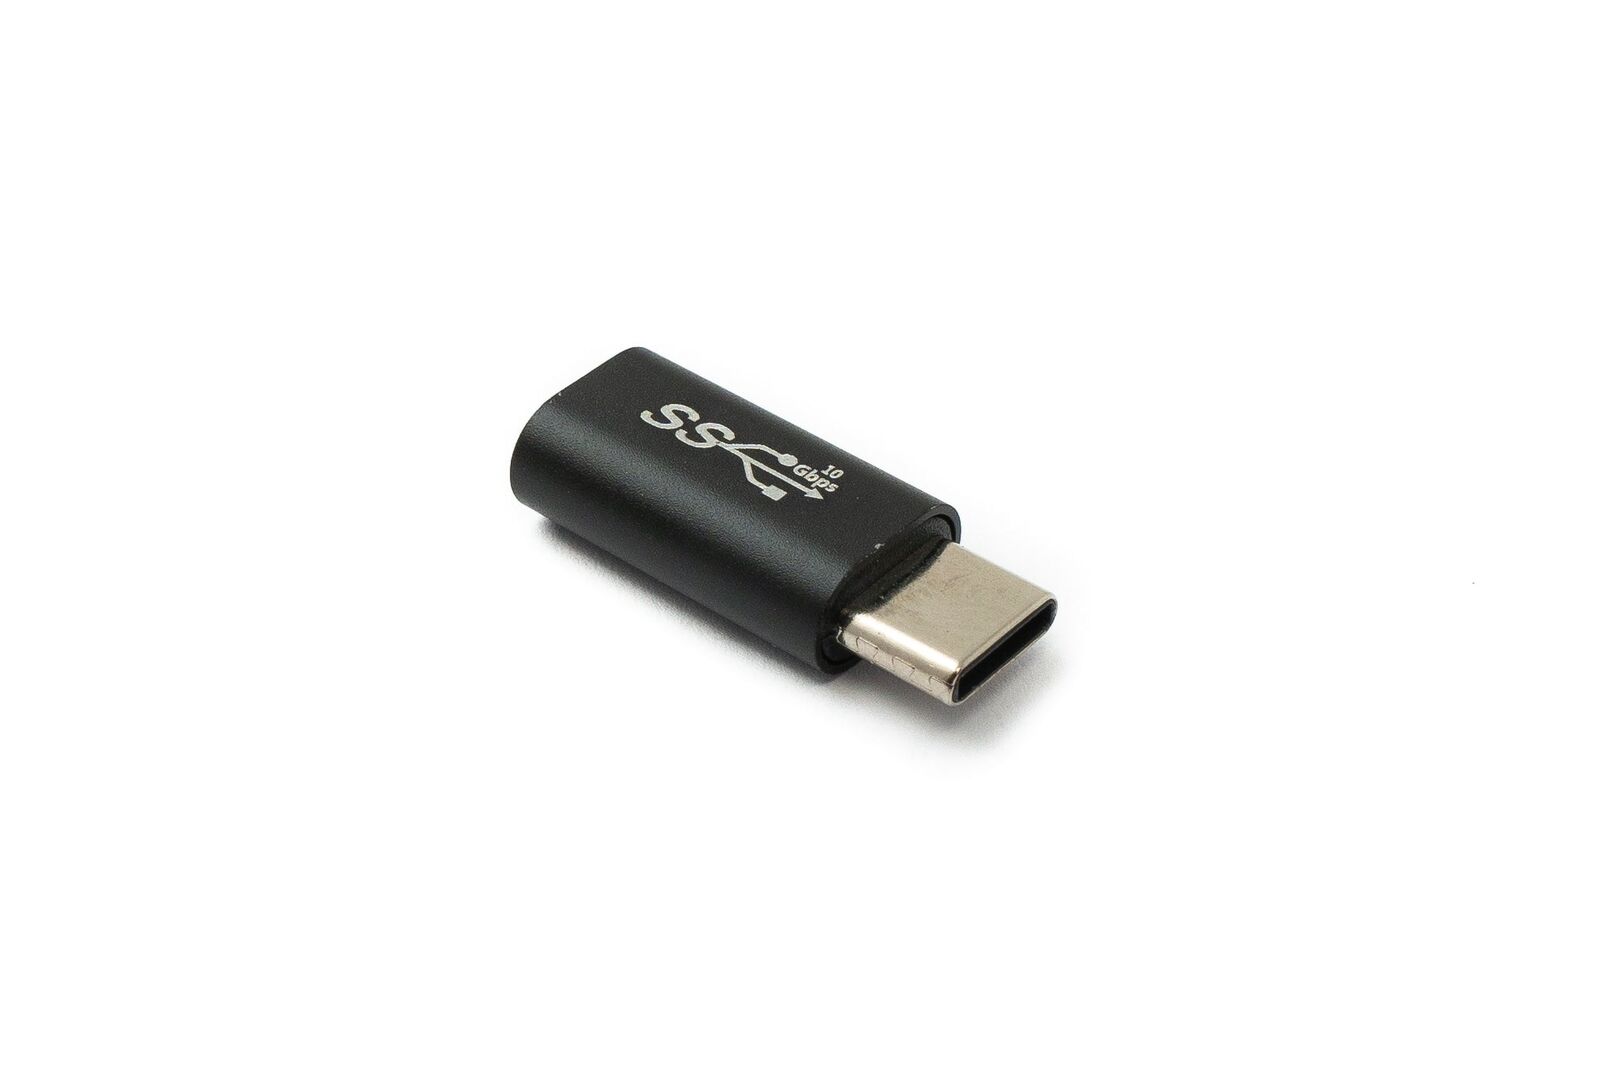 USB 3.1 Adapter Type C Male to Female Cable in Black